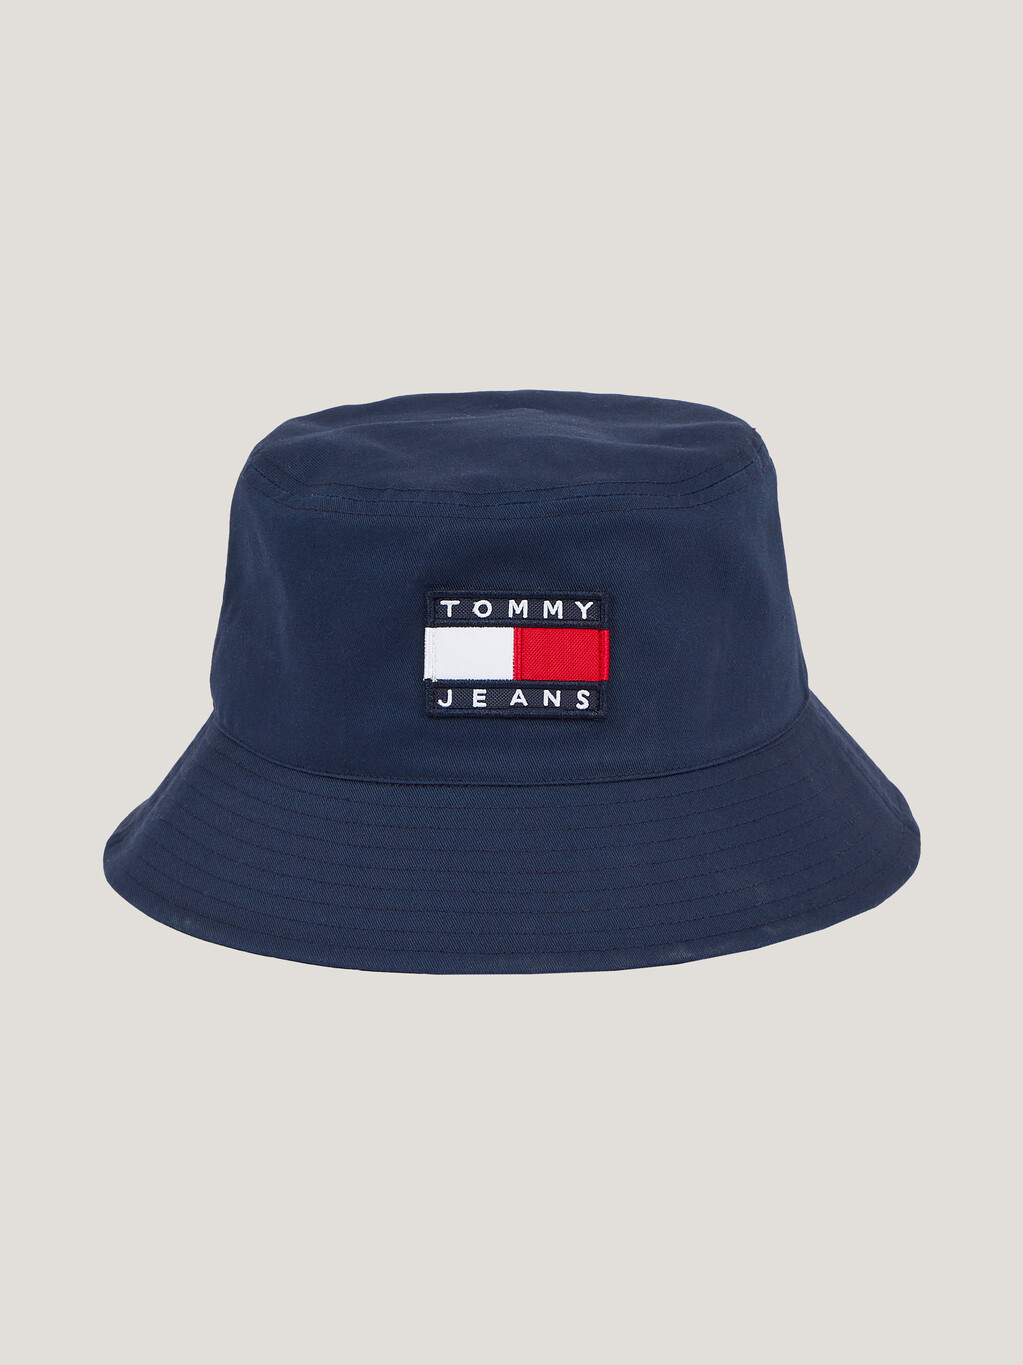 Tommy Jeans Heritage Bucket Hat | | Tommy Hilfiger Malaysia